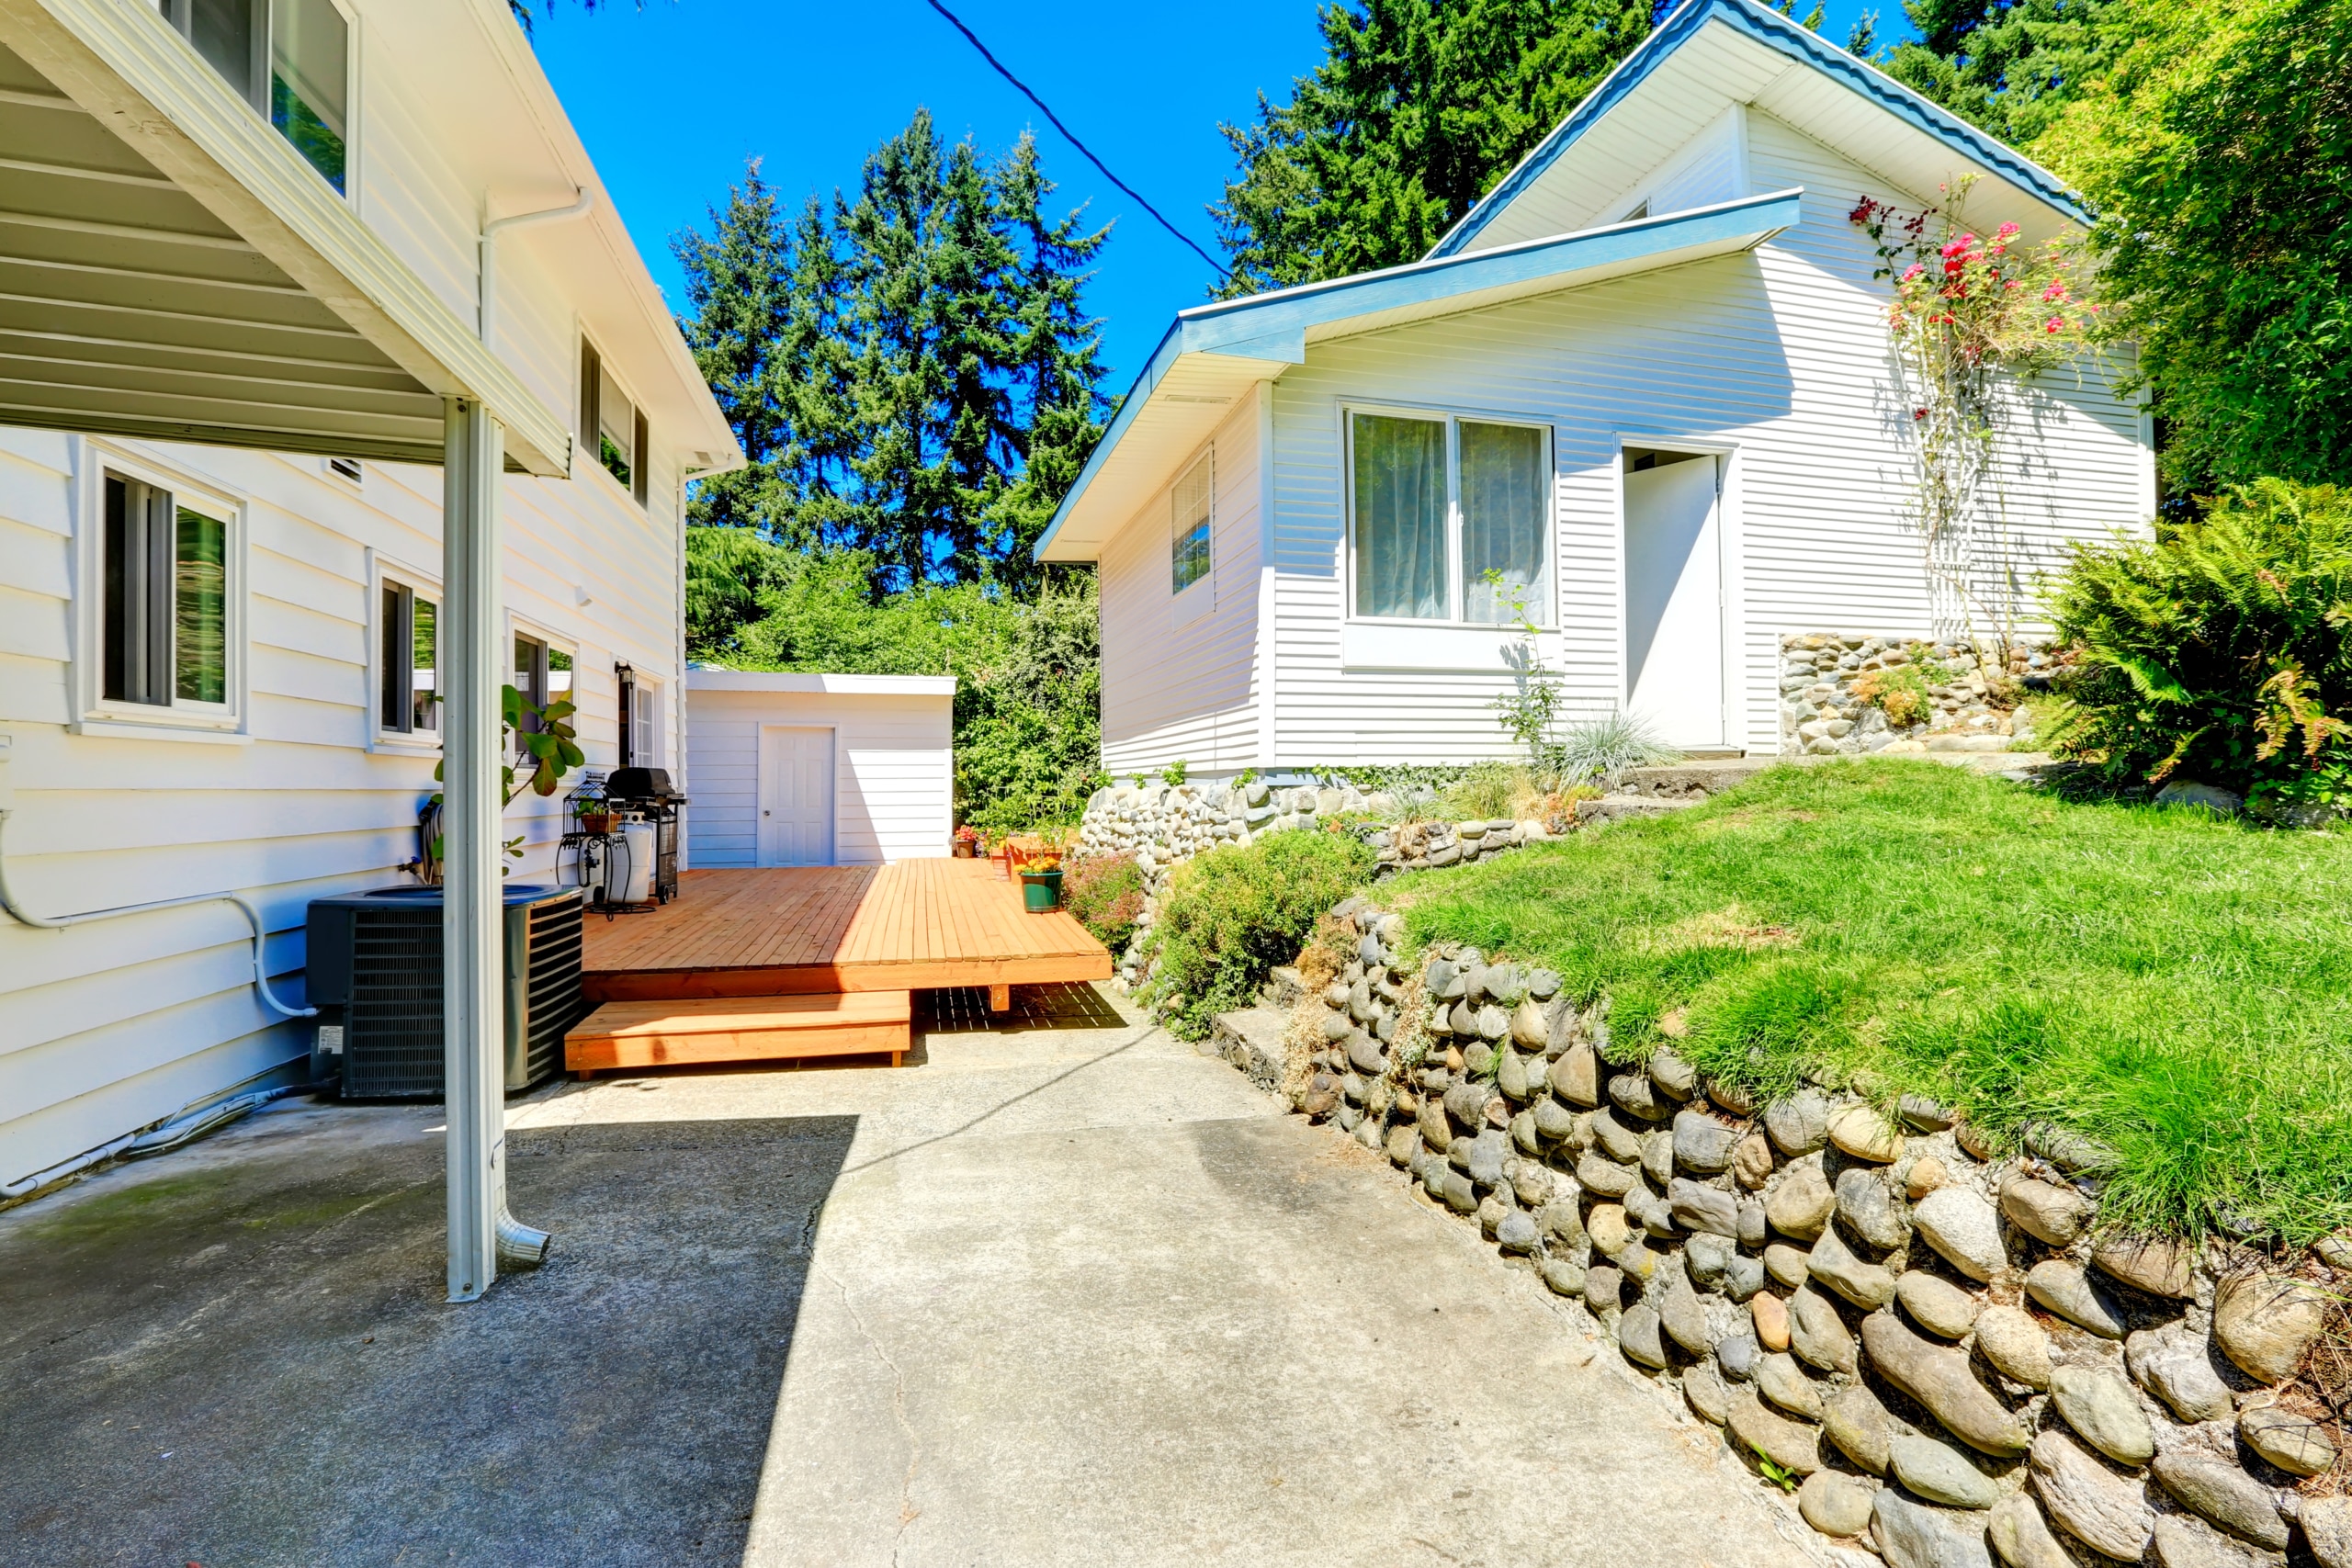 Granny Flats are growing in popularity due to the housing crunch